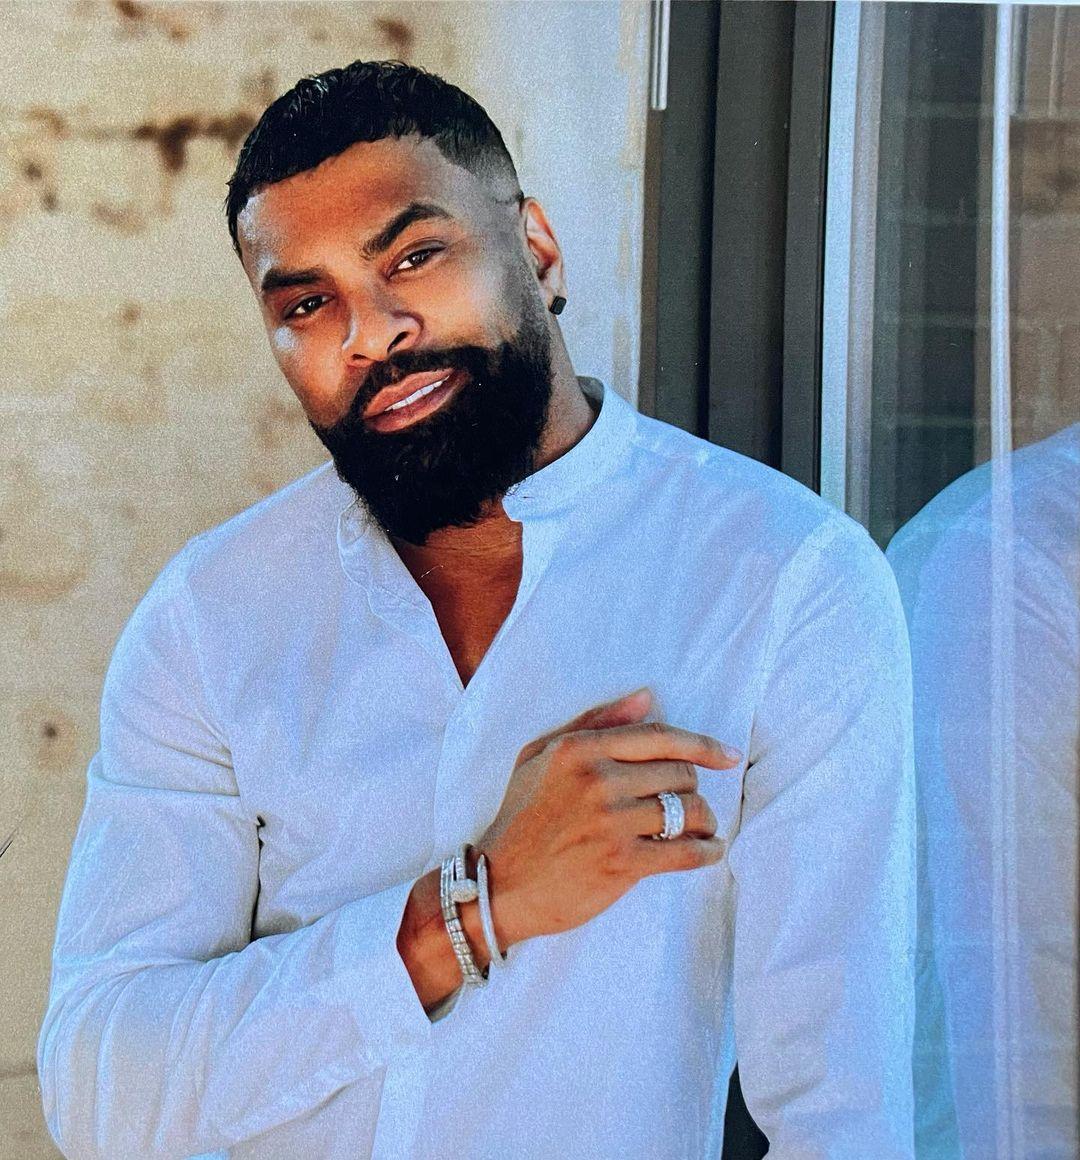 Ginuwine Passes Out During Dangerous Stunt While Filming Reality Show